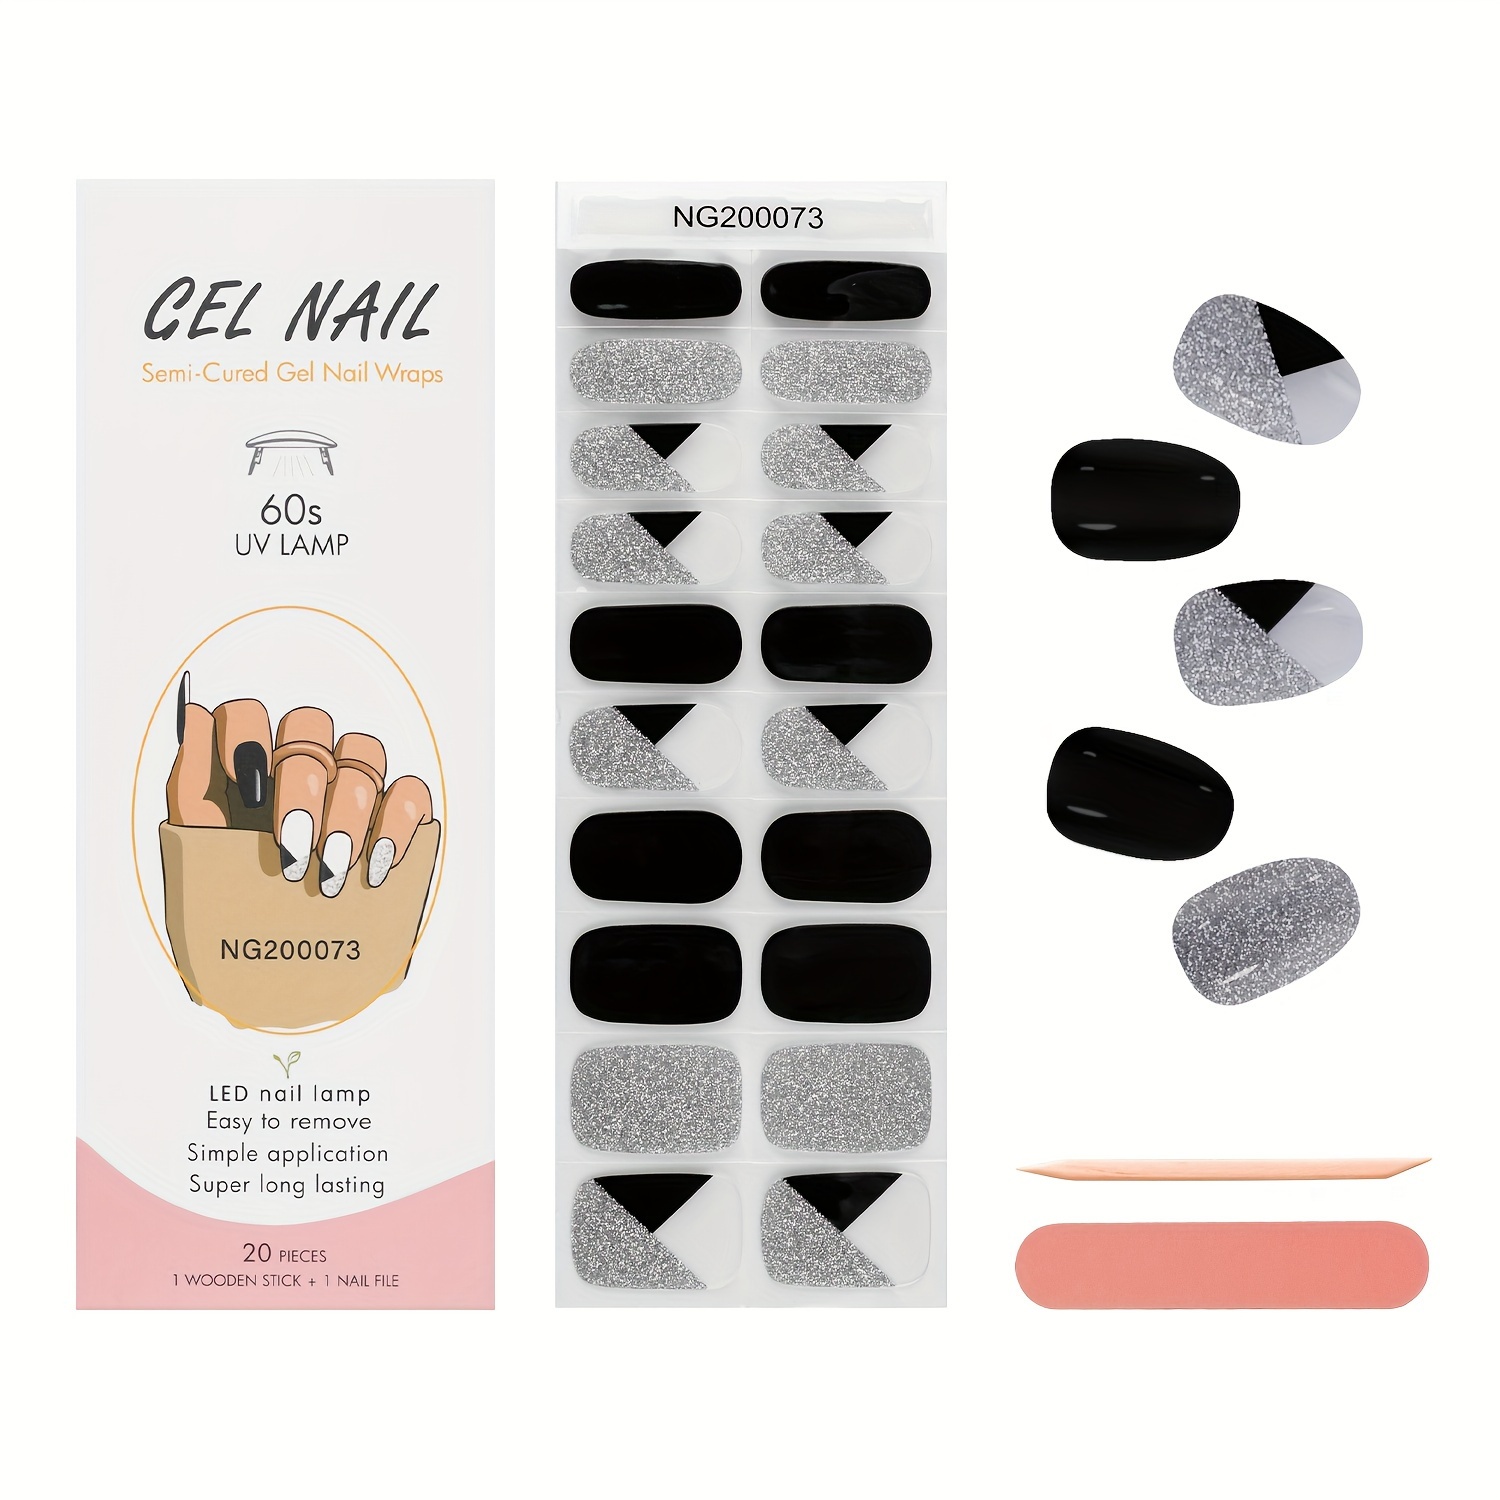 

Semi Cured Gel Nail Wraps, Semi-cured Glitter Gel Nail Strips-works With Any Nail Lamps, Salon-quality,long Lasting,easy To Apply & Remove-includes Nail File & Wooden Stick